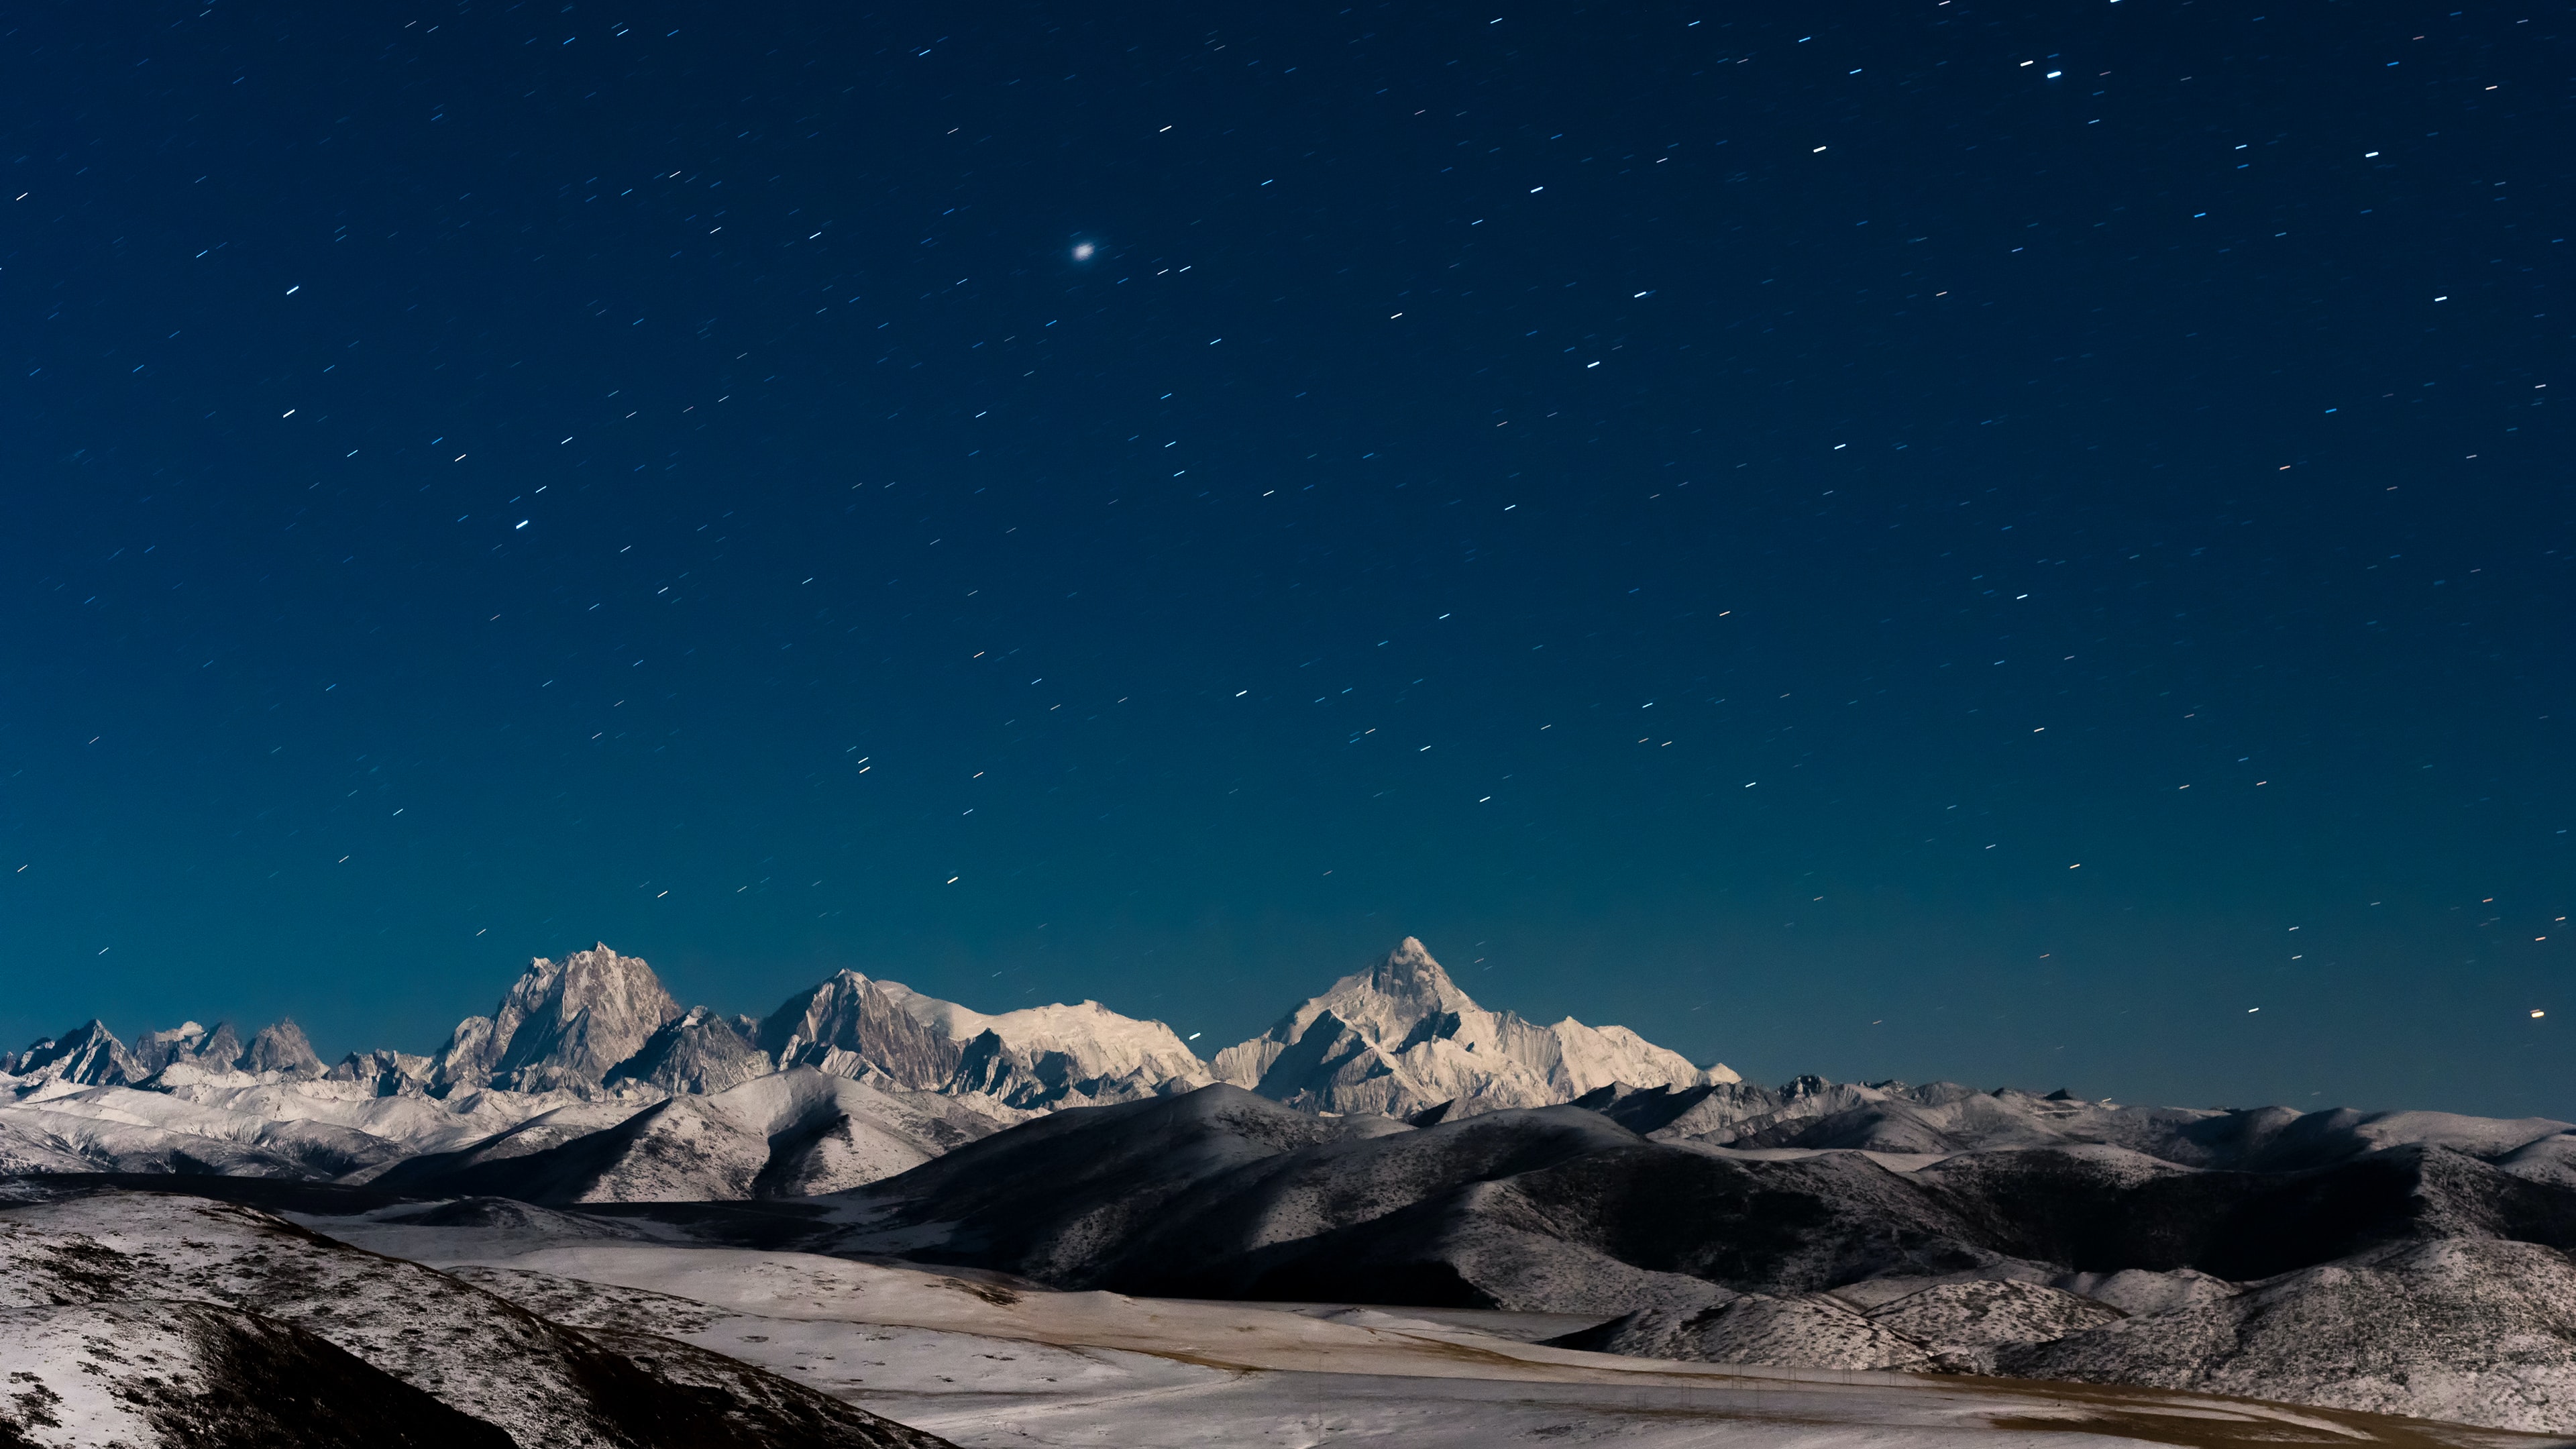 Landscape Stars Snow Mountains Starry Night Nature 3840x2160